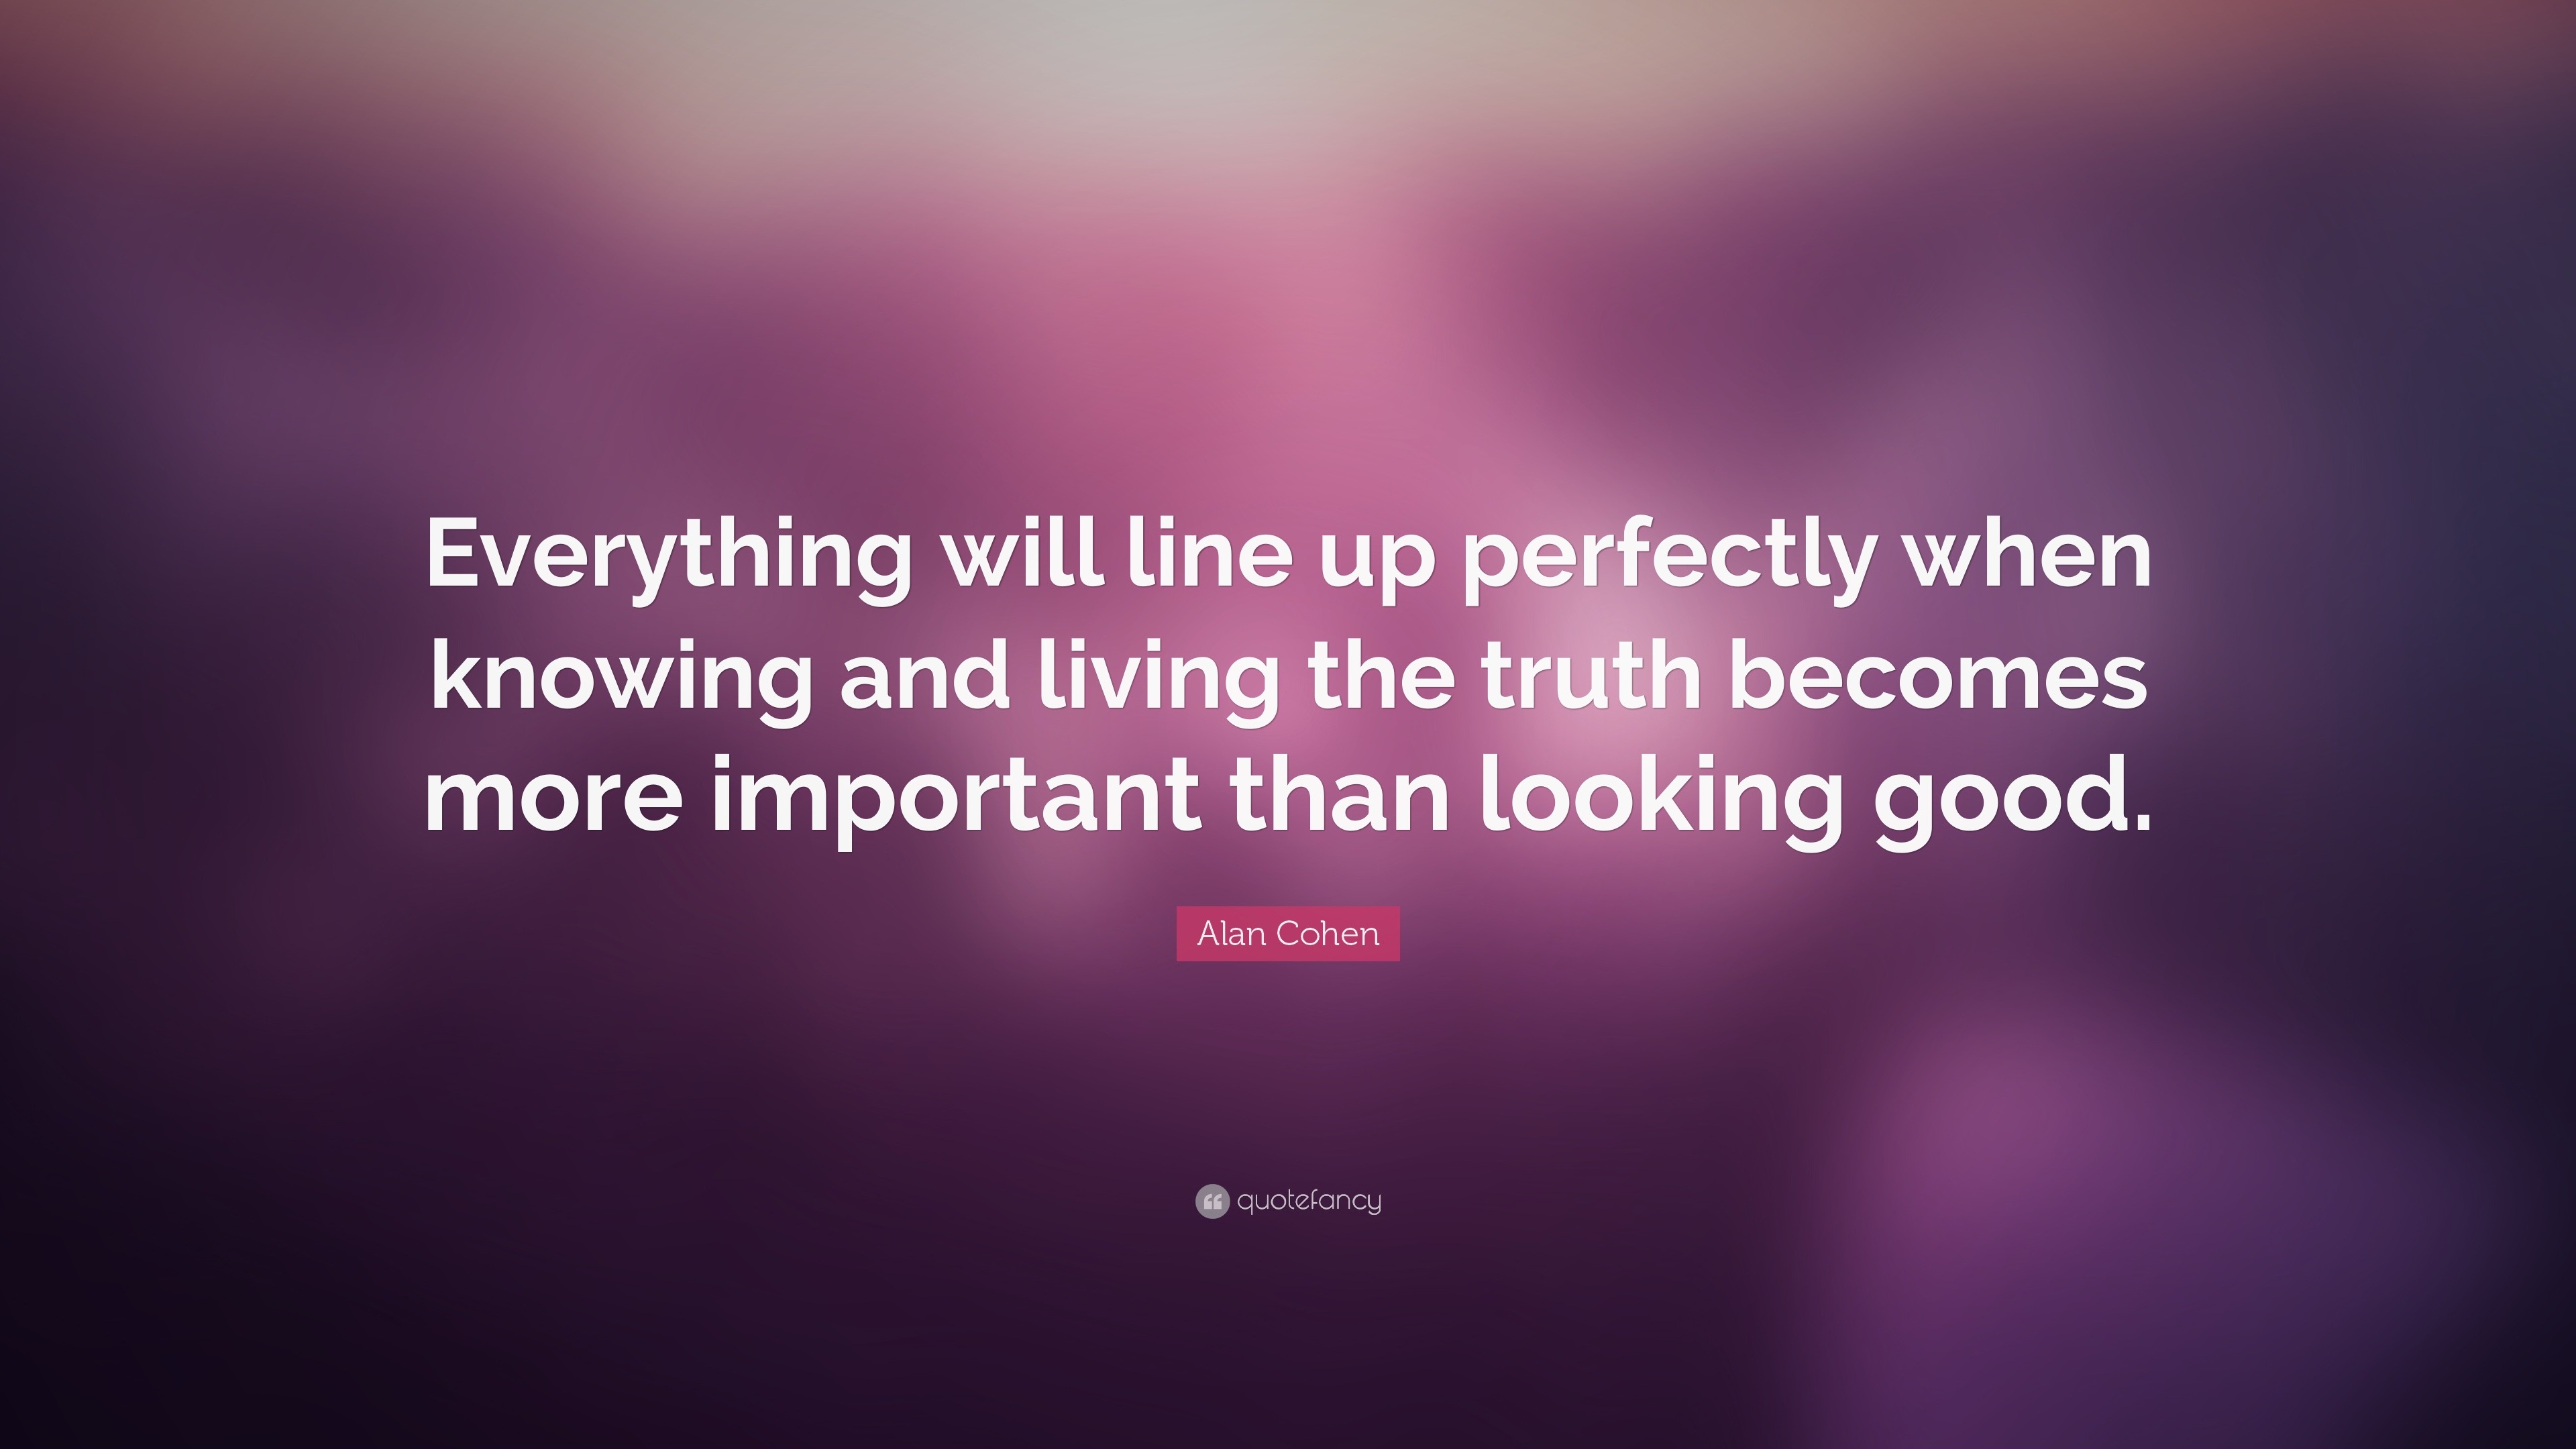 Alan Cohen Quote: “Everything will line up perfectly when knowing and ...